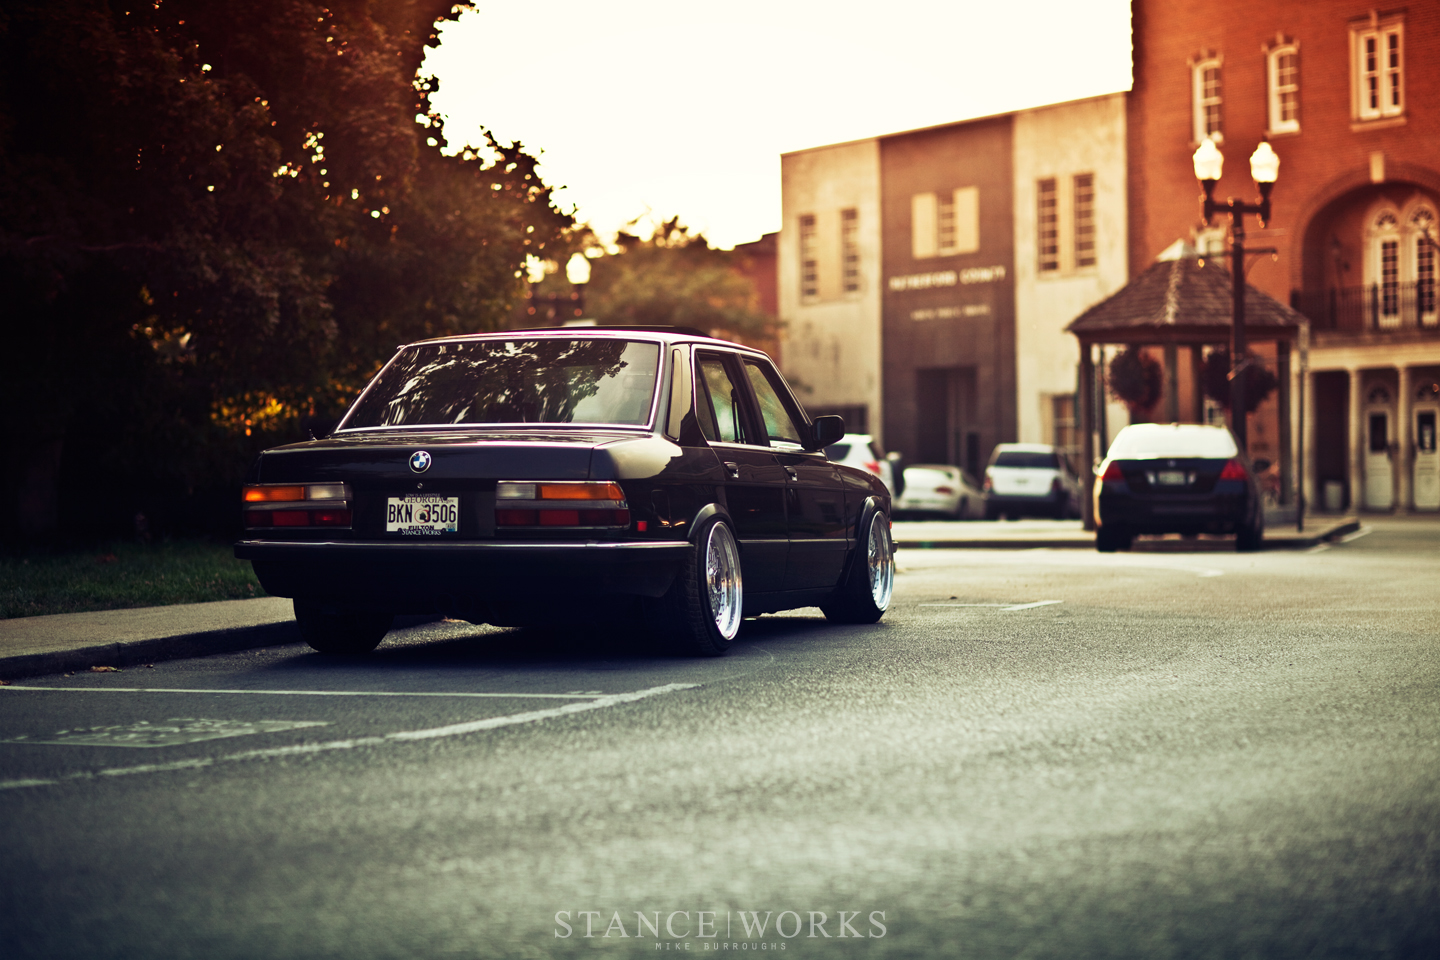 Bmw E28 Wallpapers